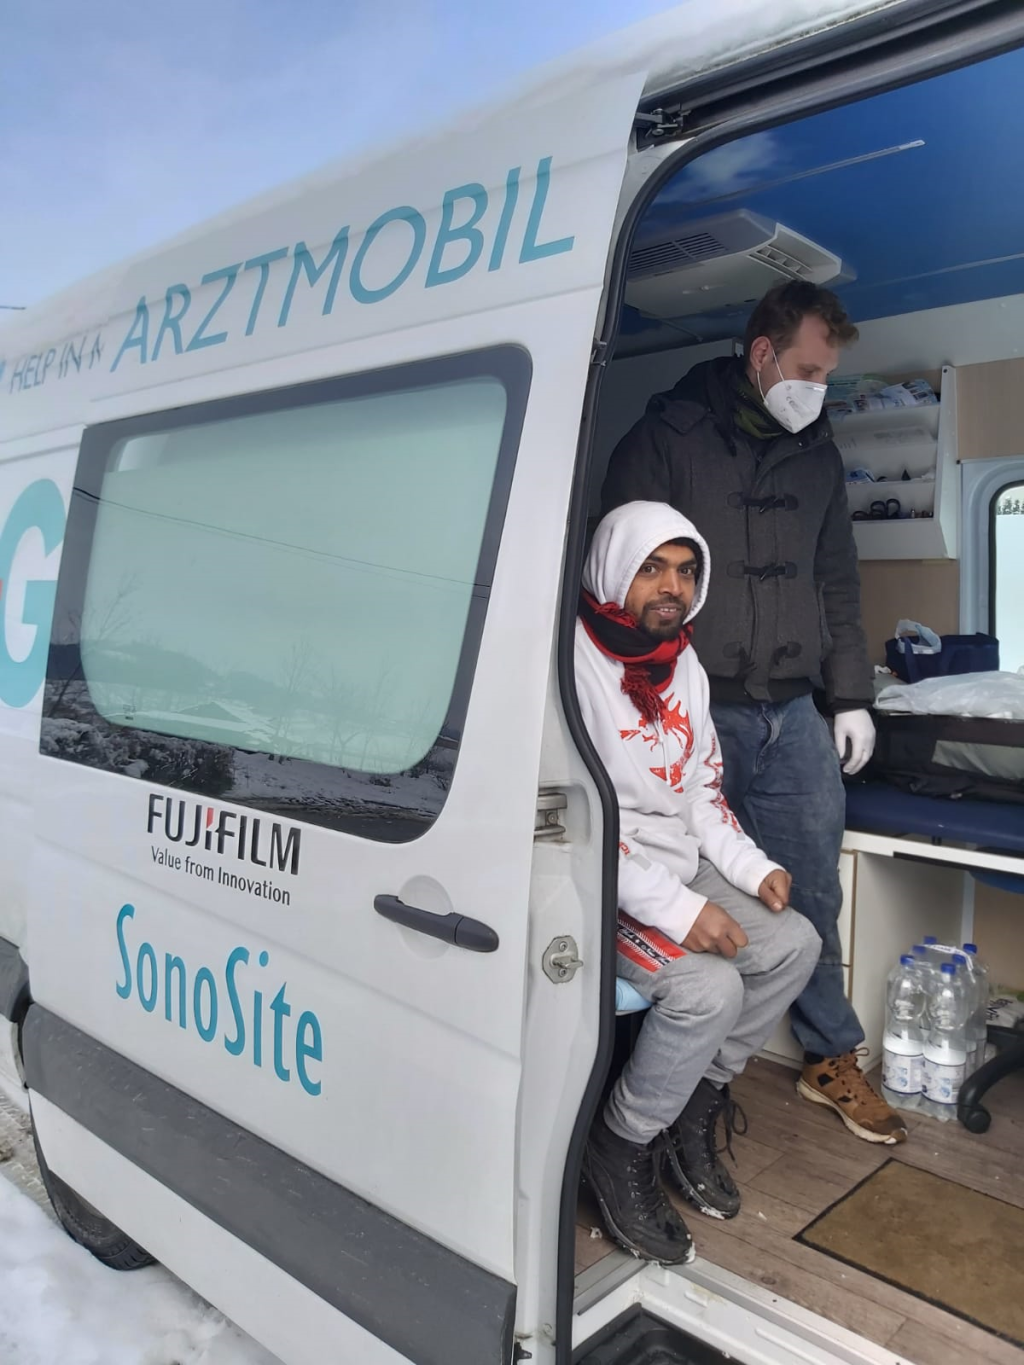 A migrant and a member of the "Armut und Gesundheit in Deutschland" team inside one of the organization's mobile practices in Bosnia | Photo: Gerhard Trabert